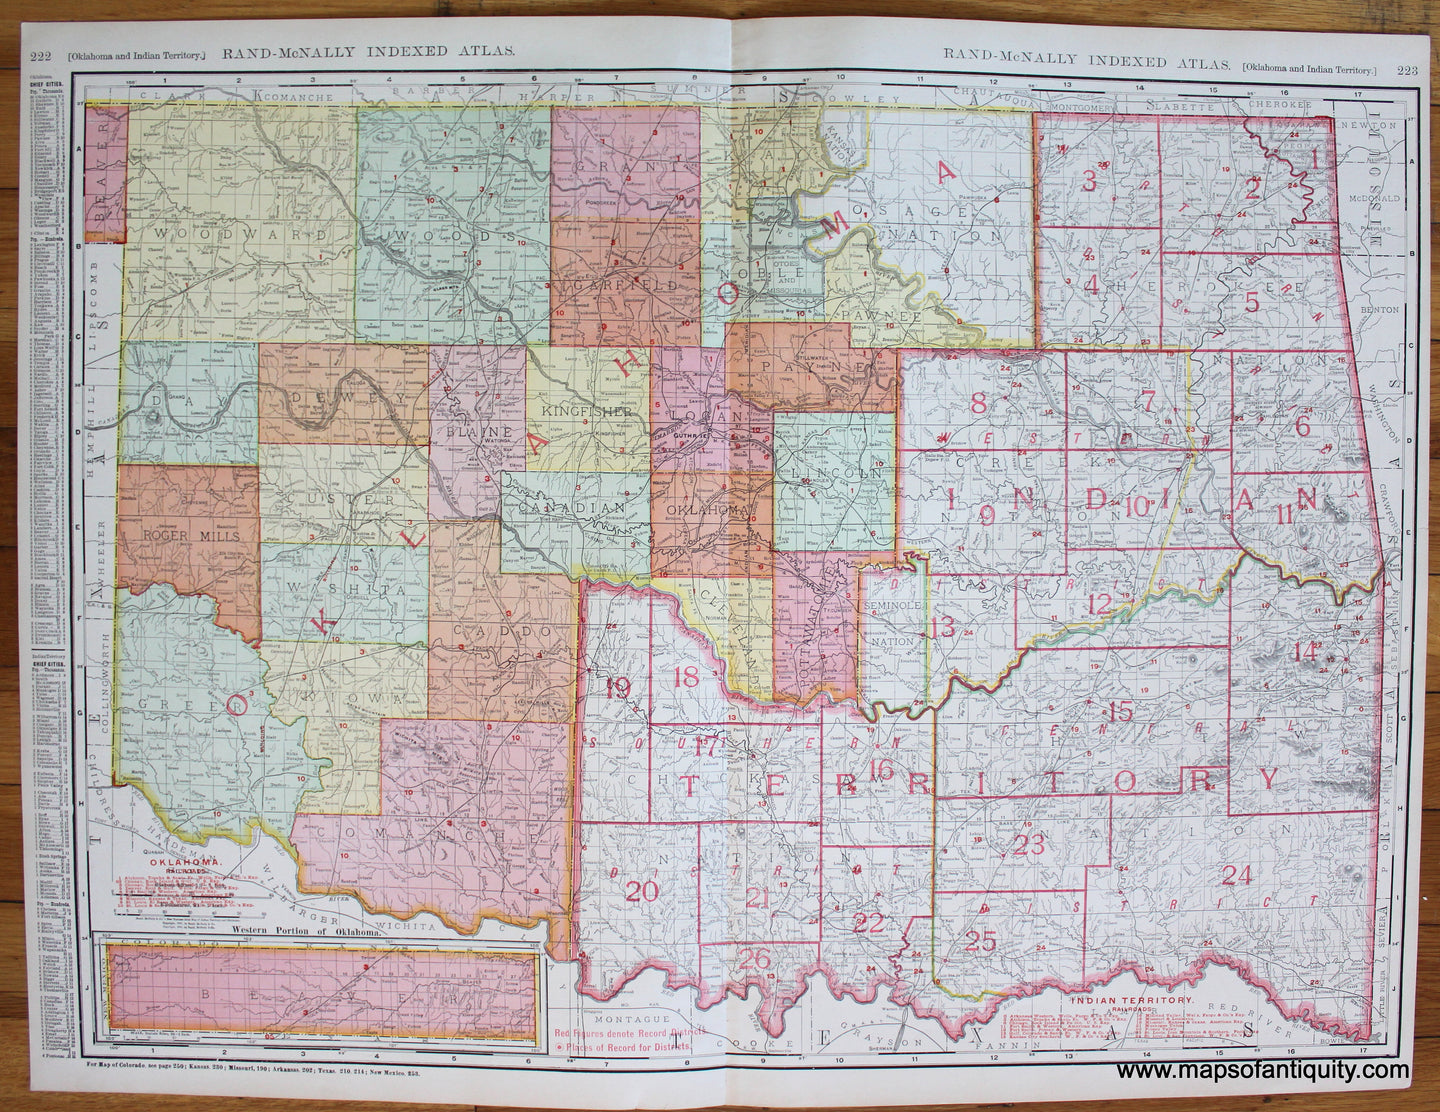 Antique-Printed-Color-Map-Oklahoma-and-Indian-Territory-1906-Rand-McNally-South-Oklahoma-1800s-19th-century-Maps-of-Antiquity